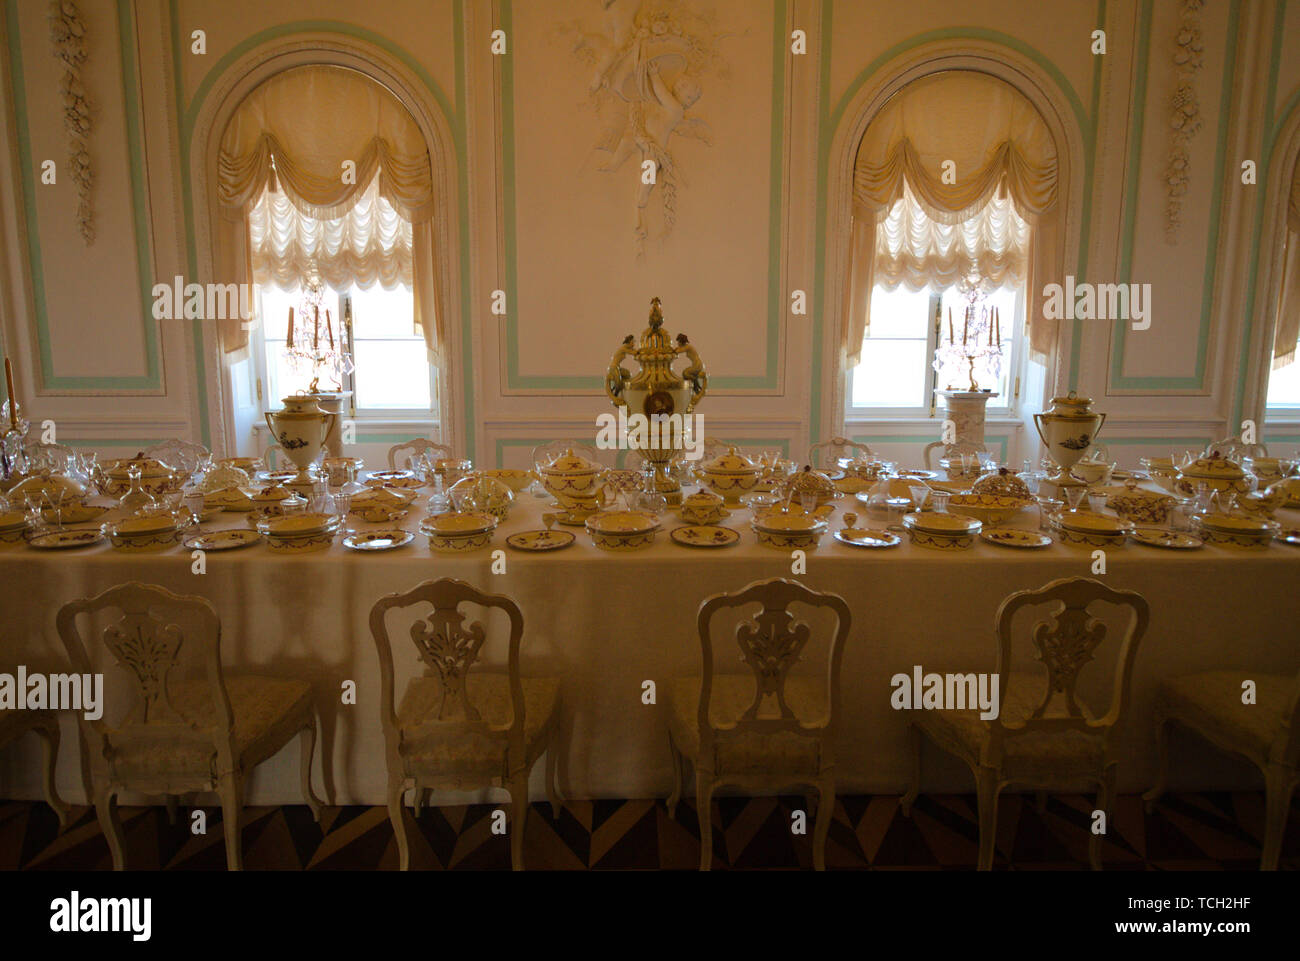 A dining room in the Grand Palace of Peterhof, Petrodvorets, Saint Petersburg, Russia Stock Photo